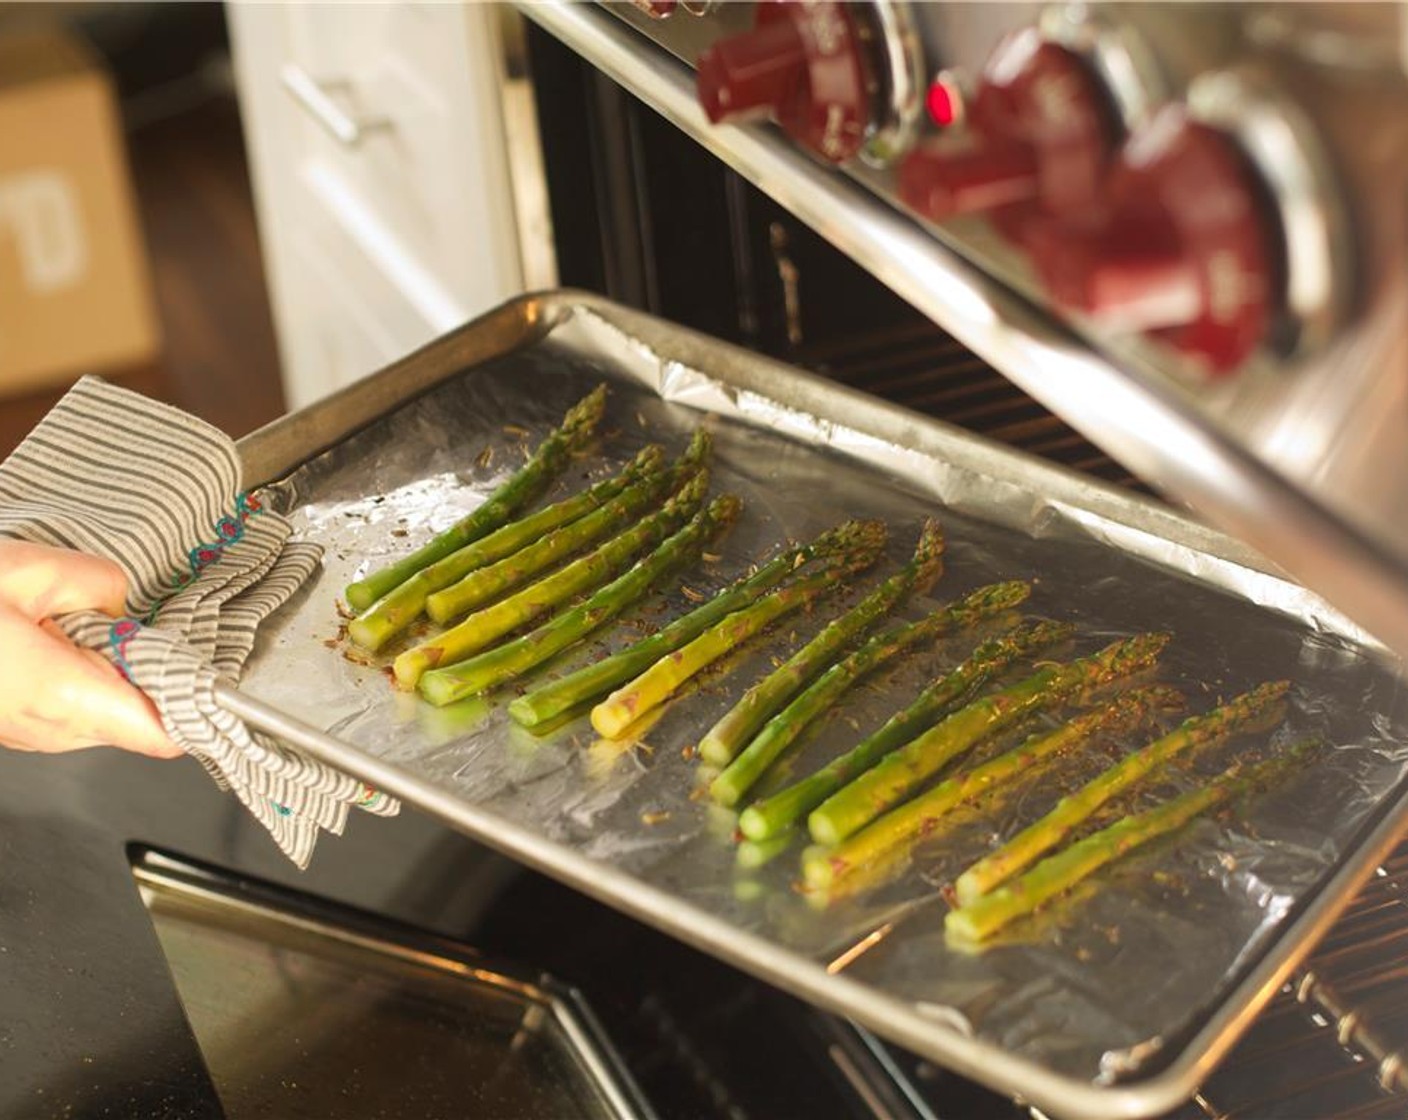 step 10 Lay the asparagus onto the sheet pan and drizzle with Olive Oil (1/2 Tbsp). Sprinkle with the Herbes de Provence (1/2 tsp) and place in the oven for ten minutes. Remove from oven and keep warm.